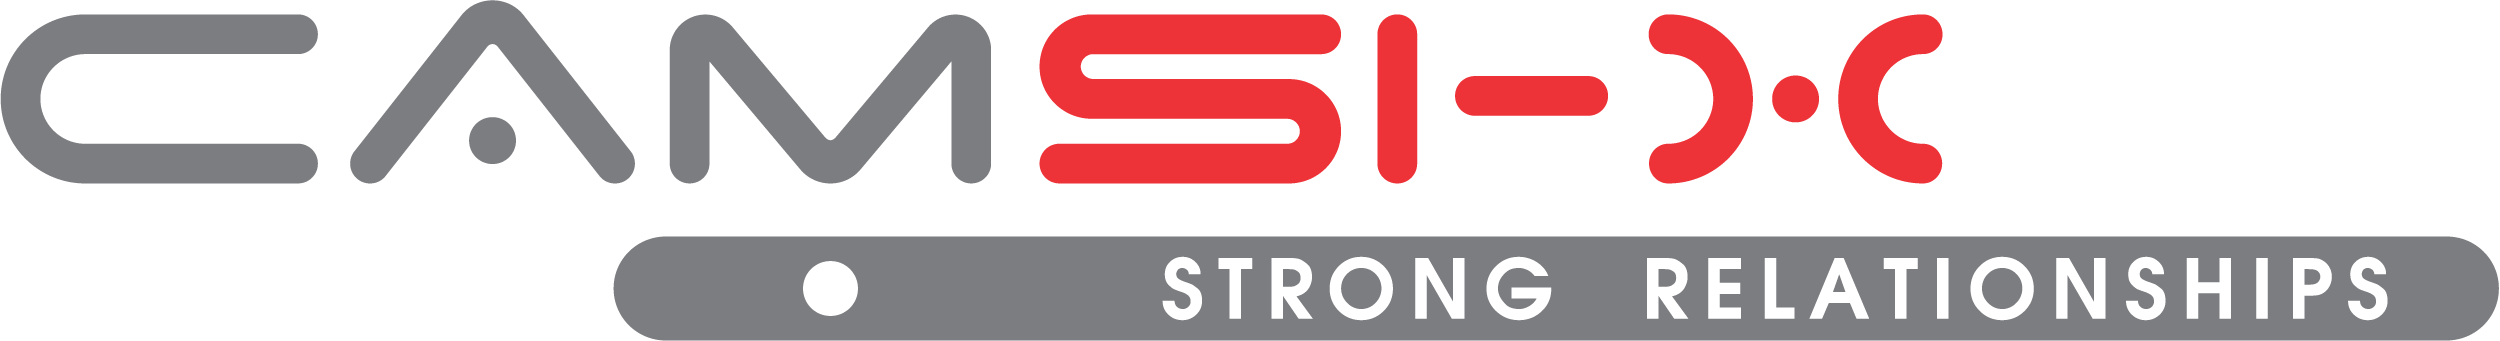 Logo Camsi-X - Strong Relationship